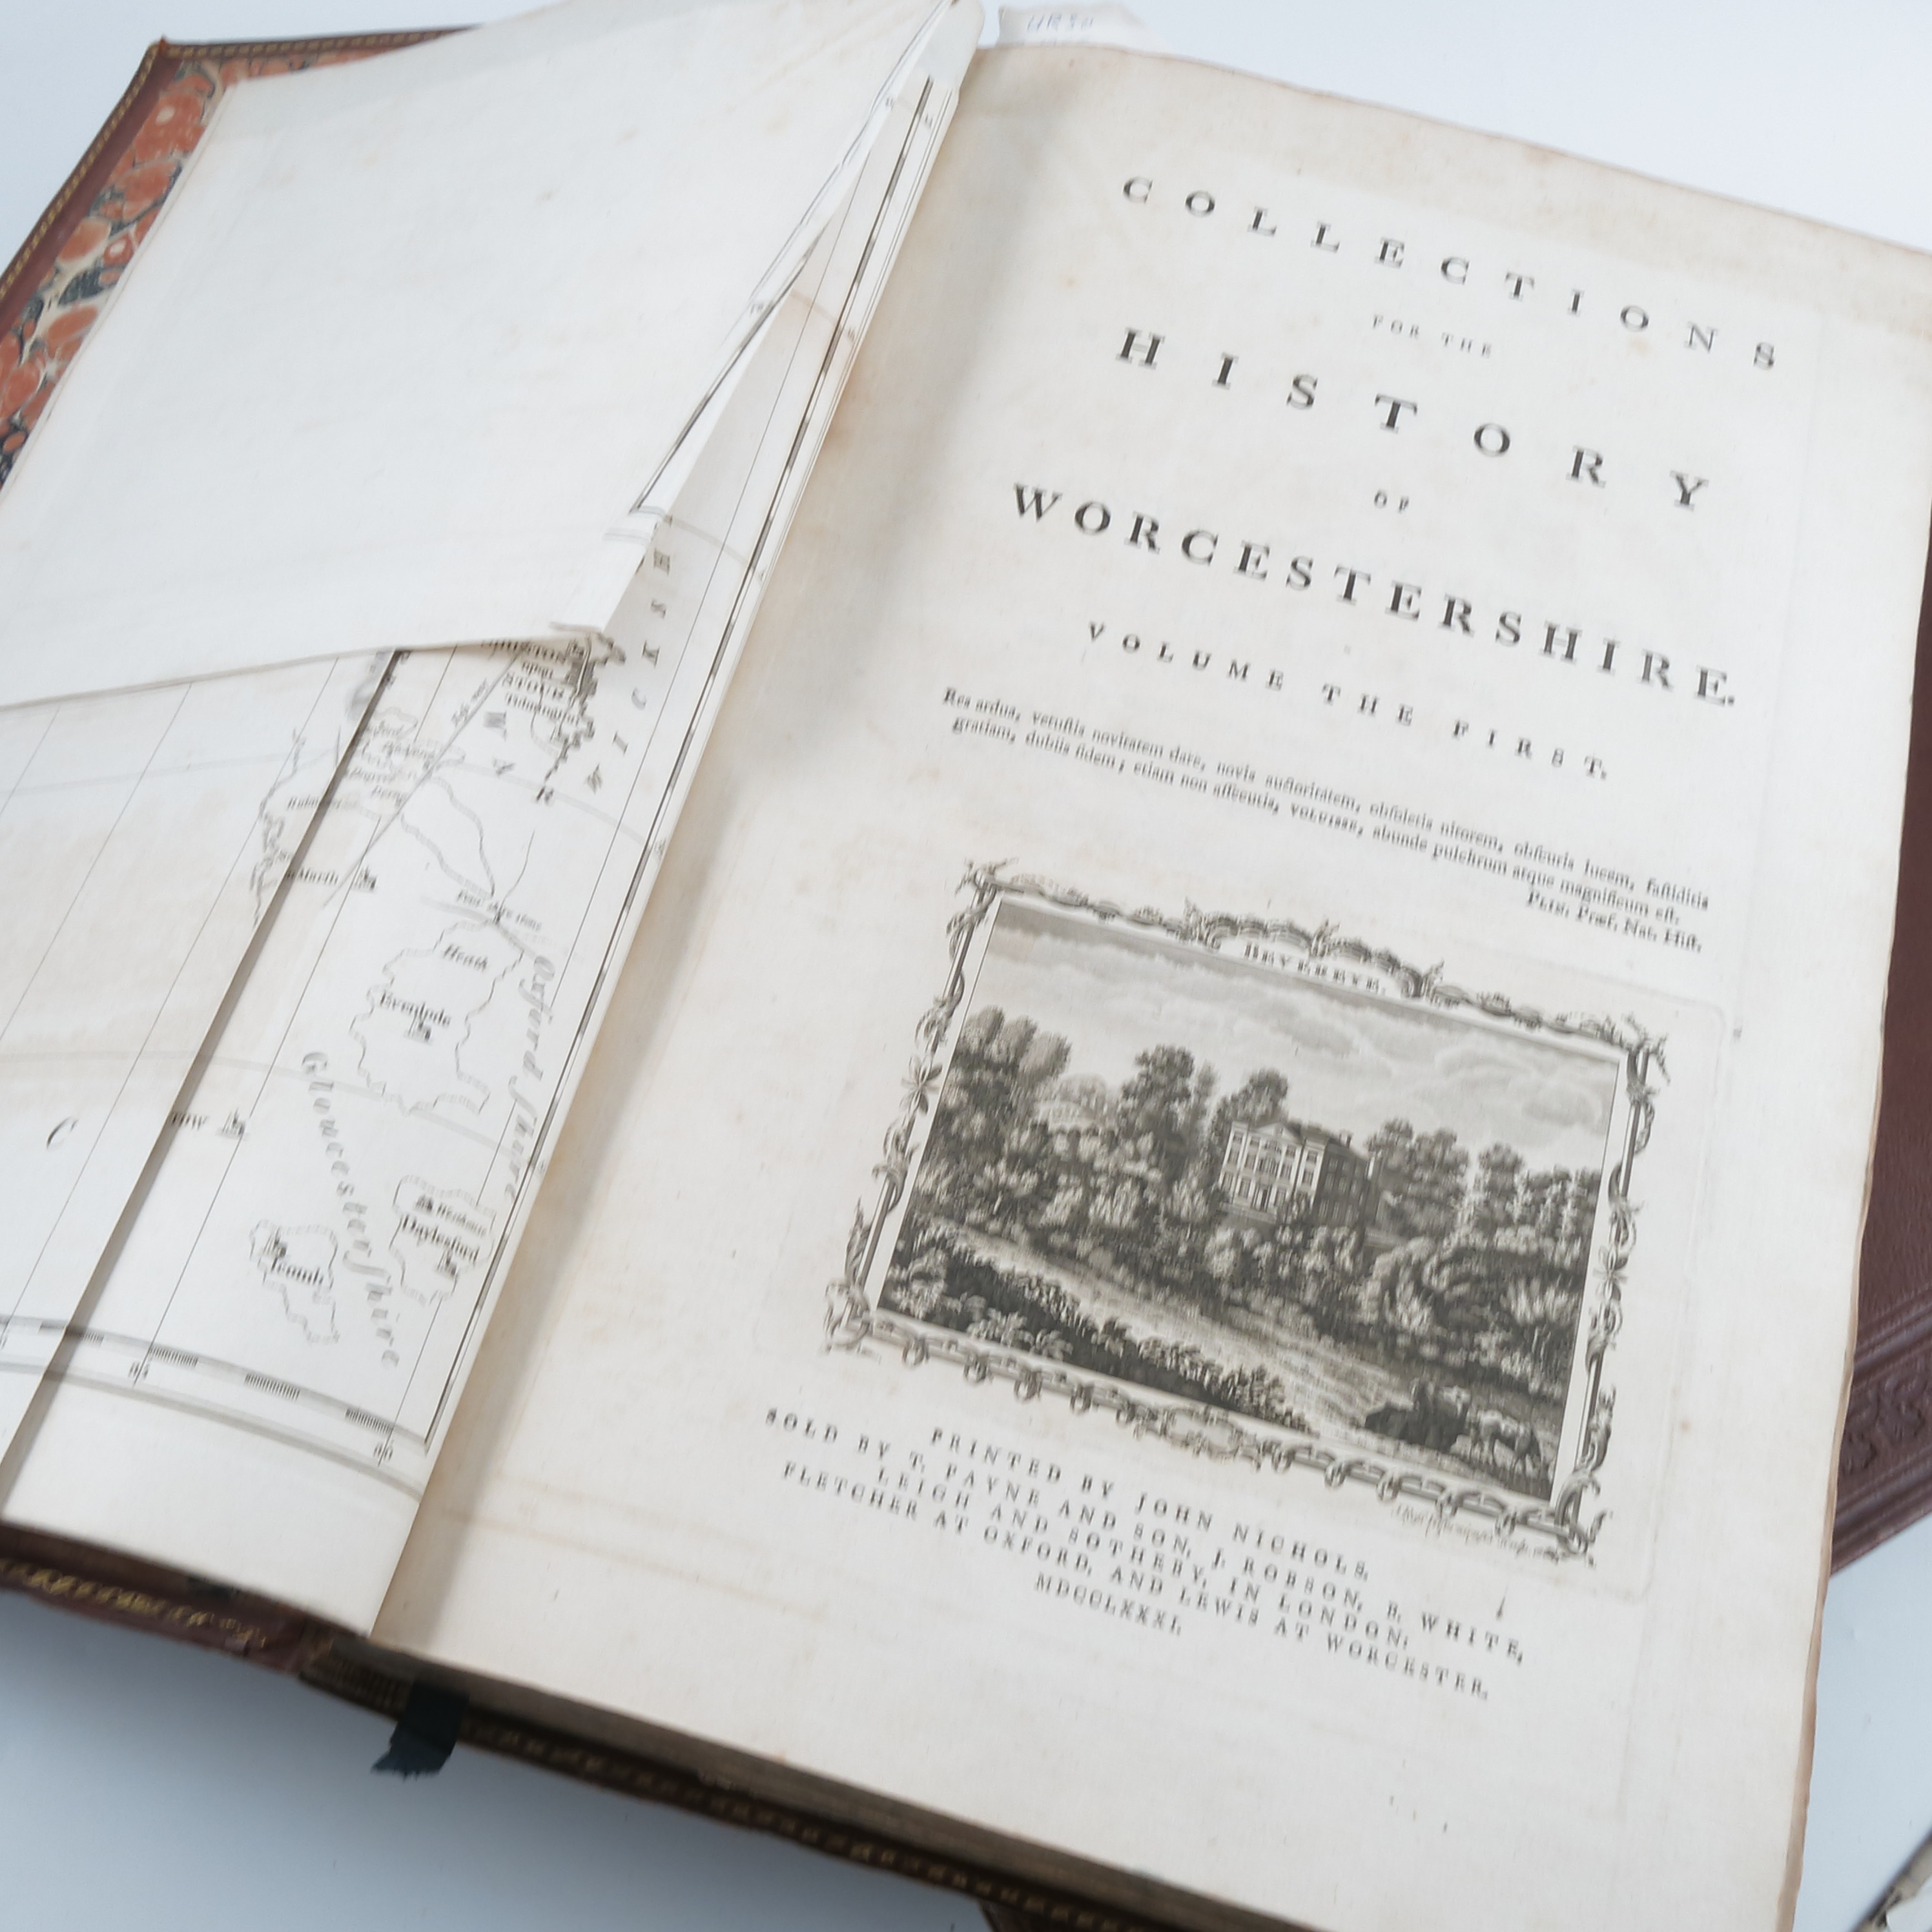 Collections for the History of Worcestershire, by T Nash, volumes I and II, dated 1781, - Image 2 of 4